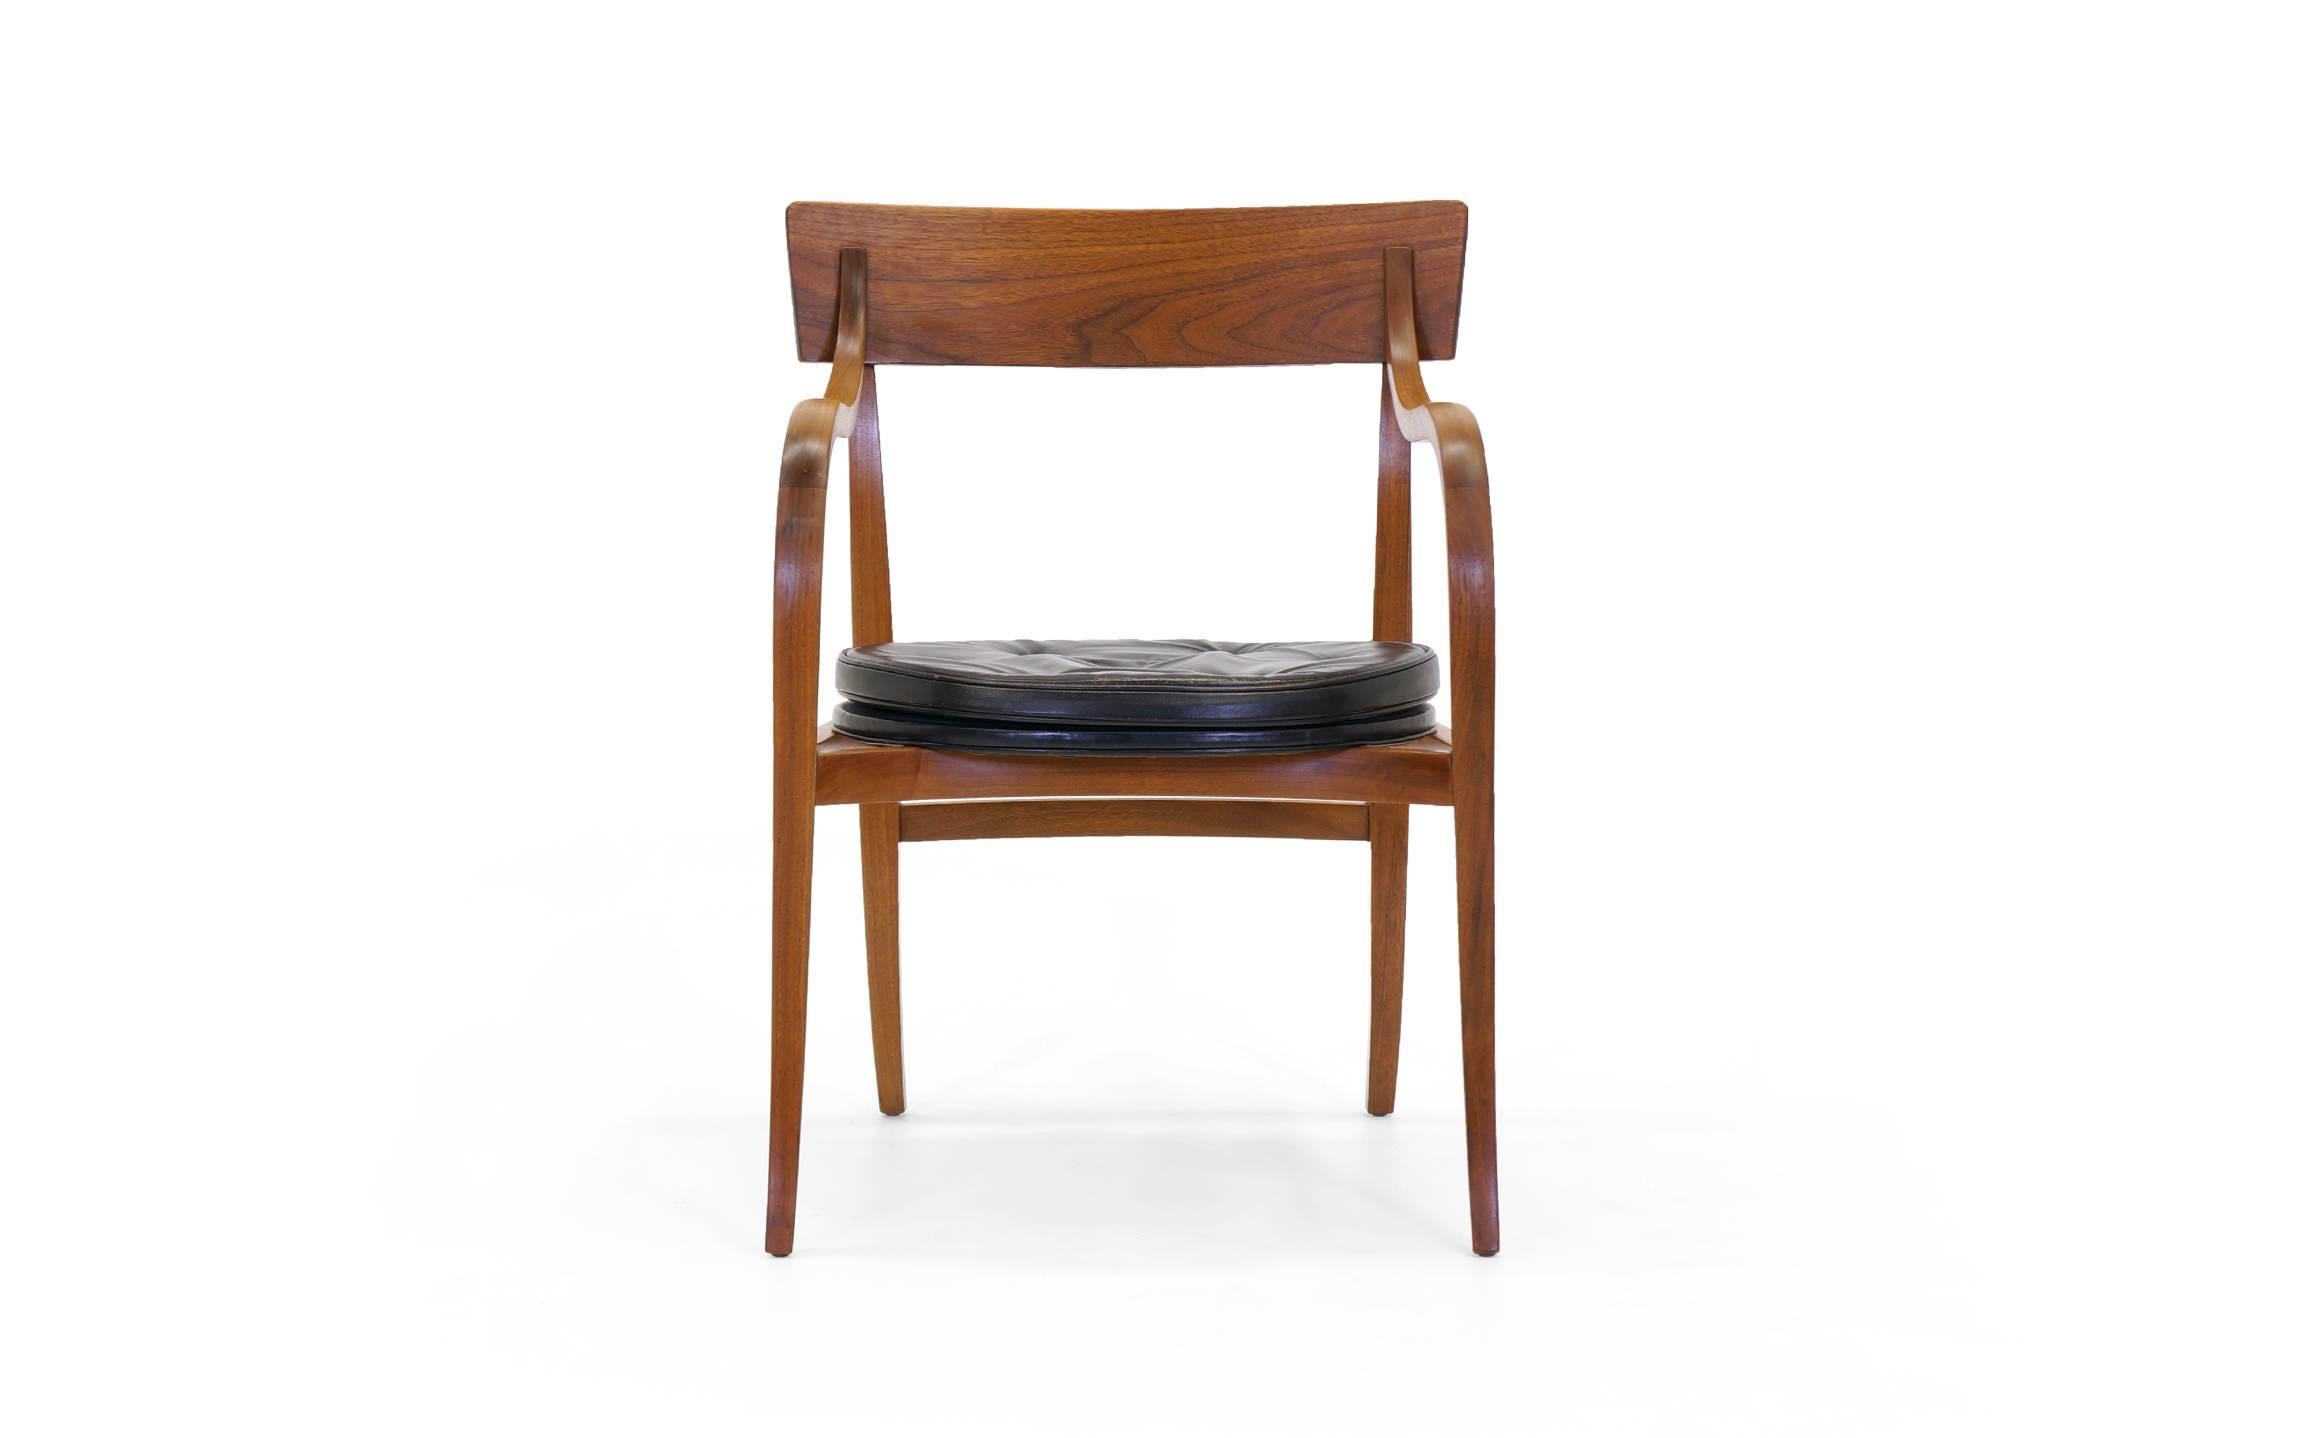 Rare opportunity. All original example of the Alexandria Chair designed by Edward Wormley for Dunbar. Retains the original, high quality black leather seat with attractive wear. This elegant, sculptural chair is highly desirable and this is the best